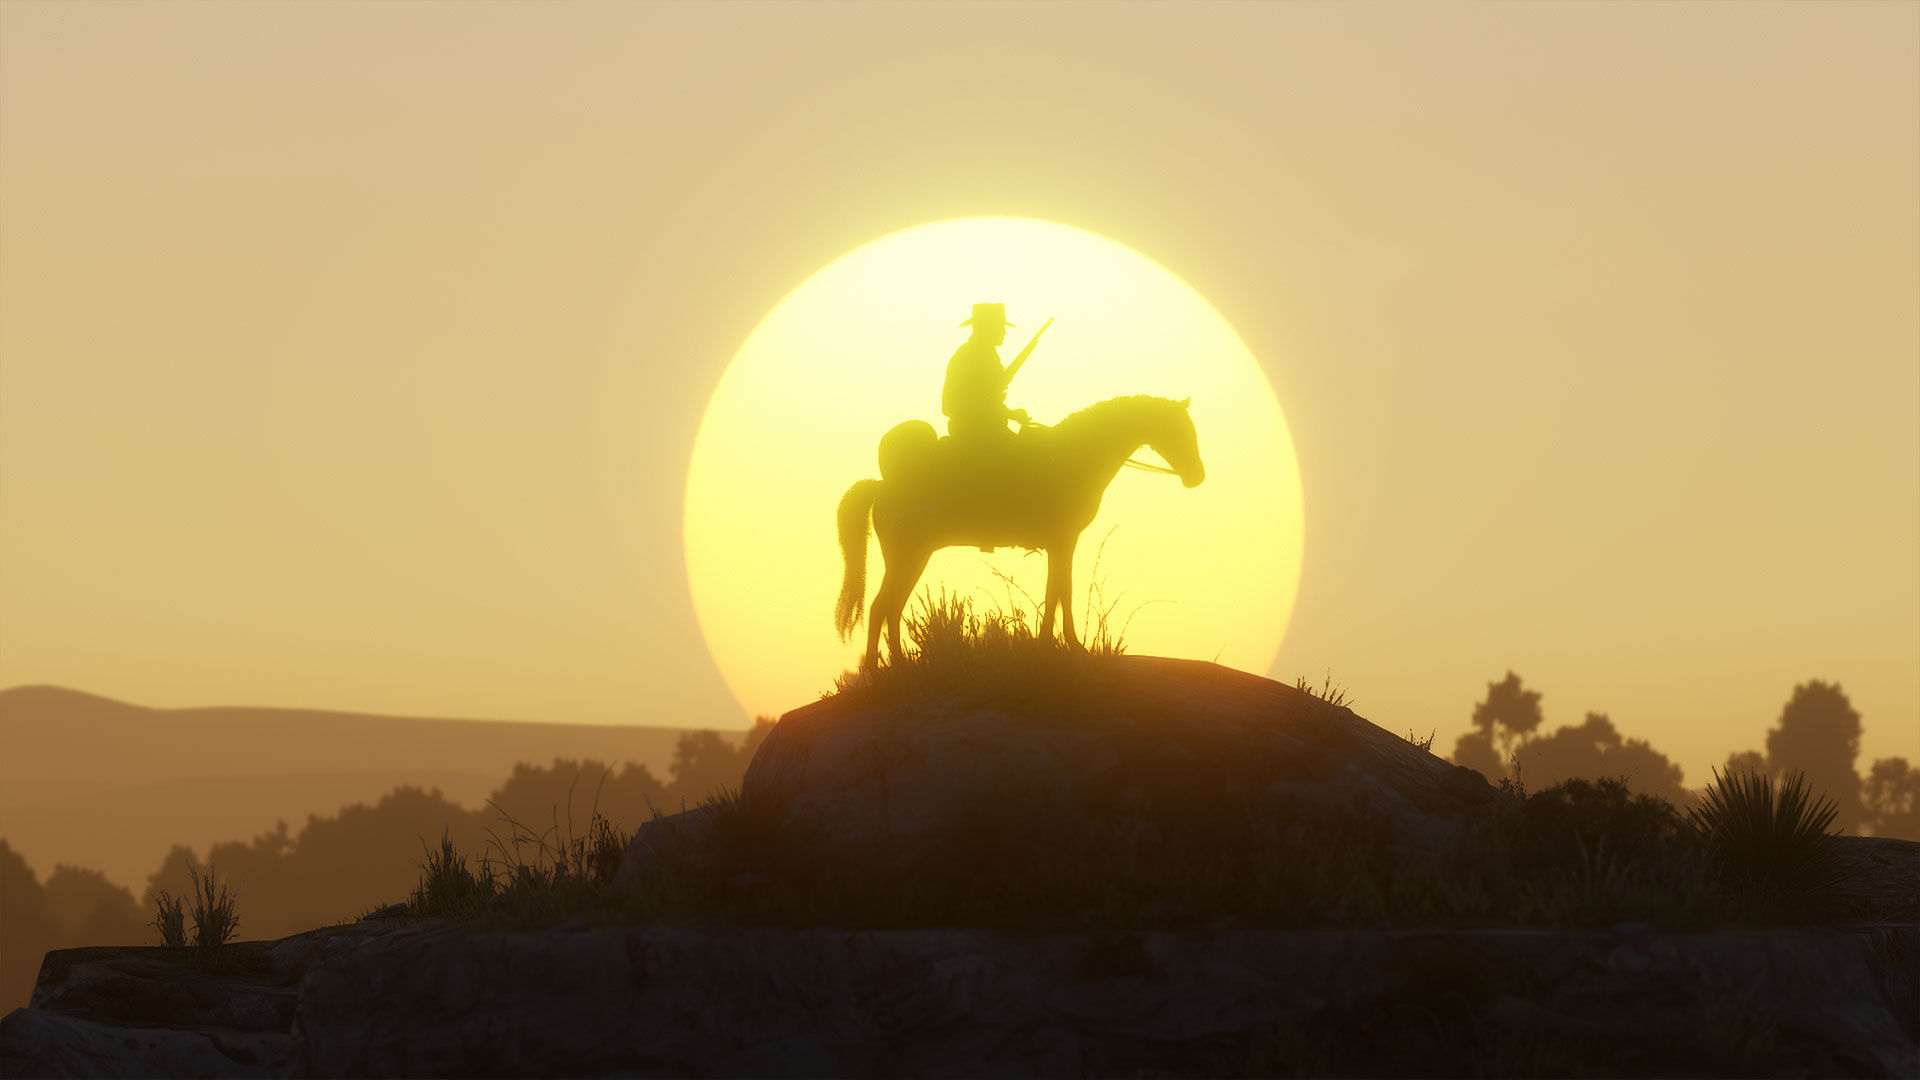 Red Dead Redemption 2 PC Review